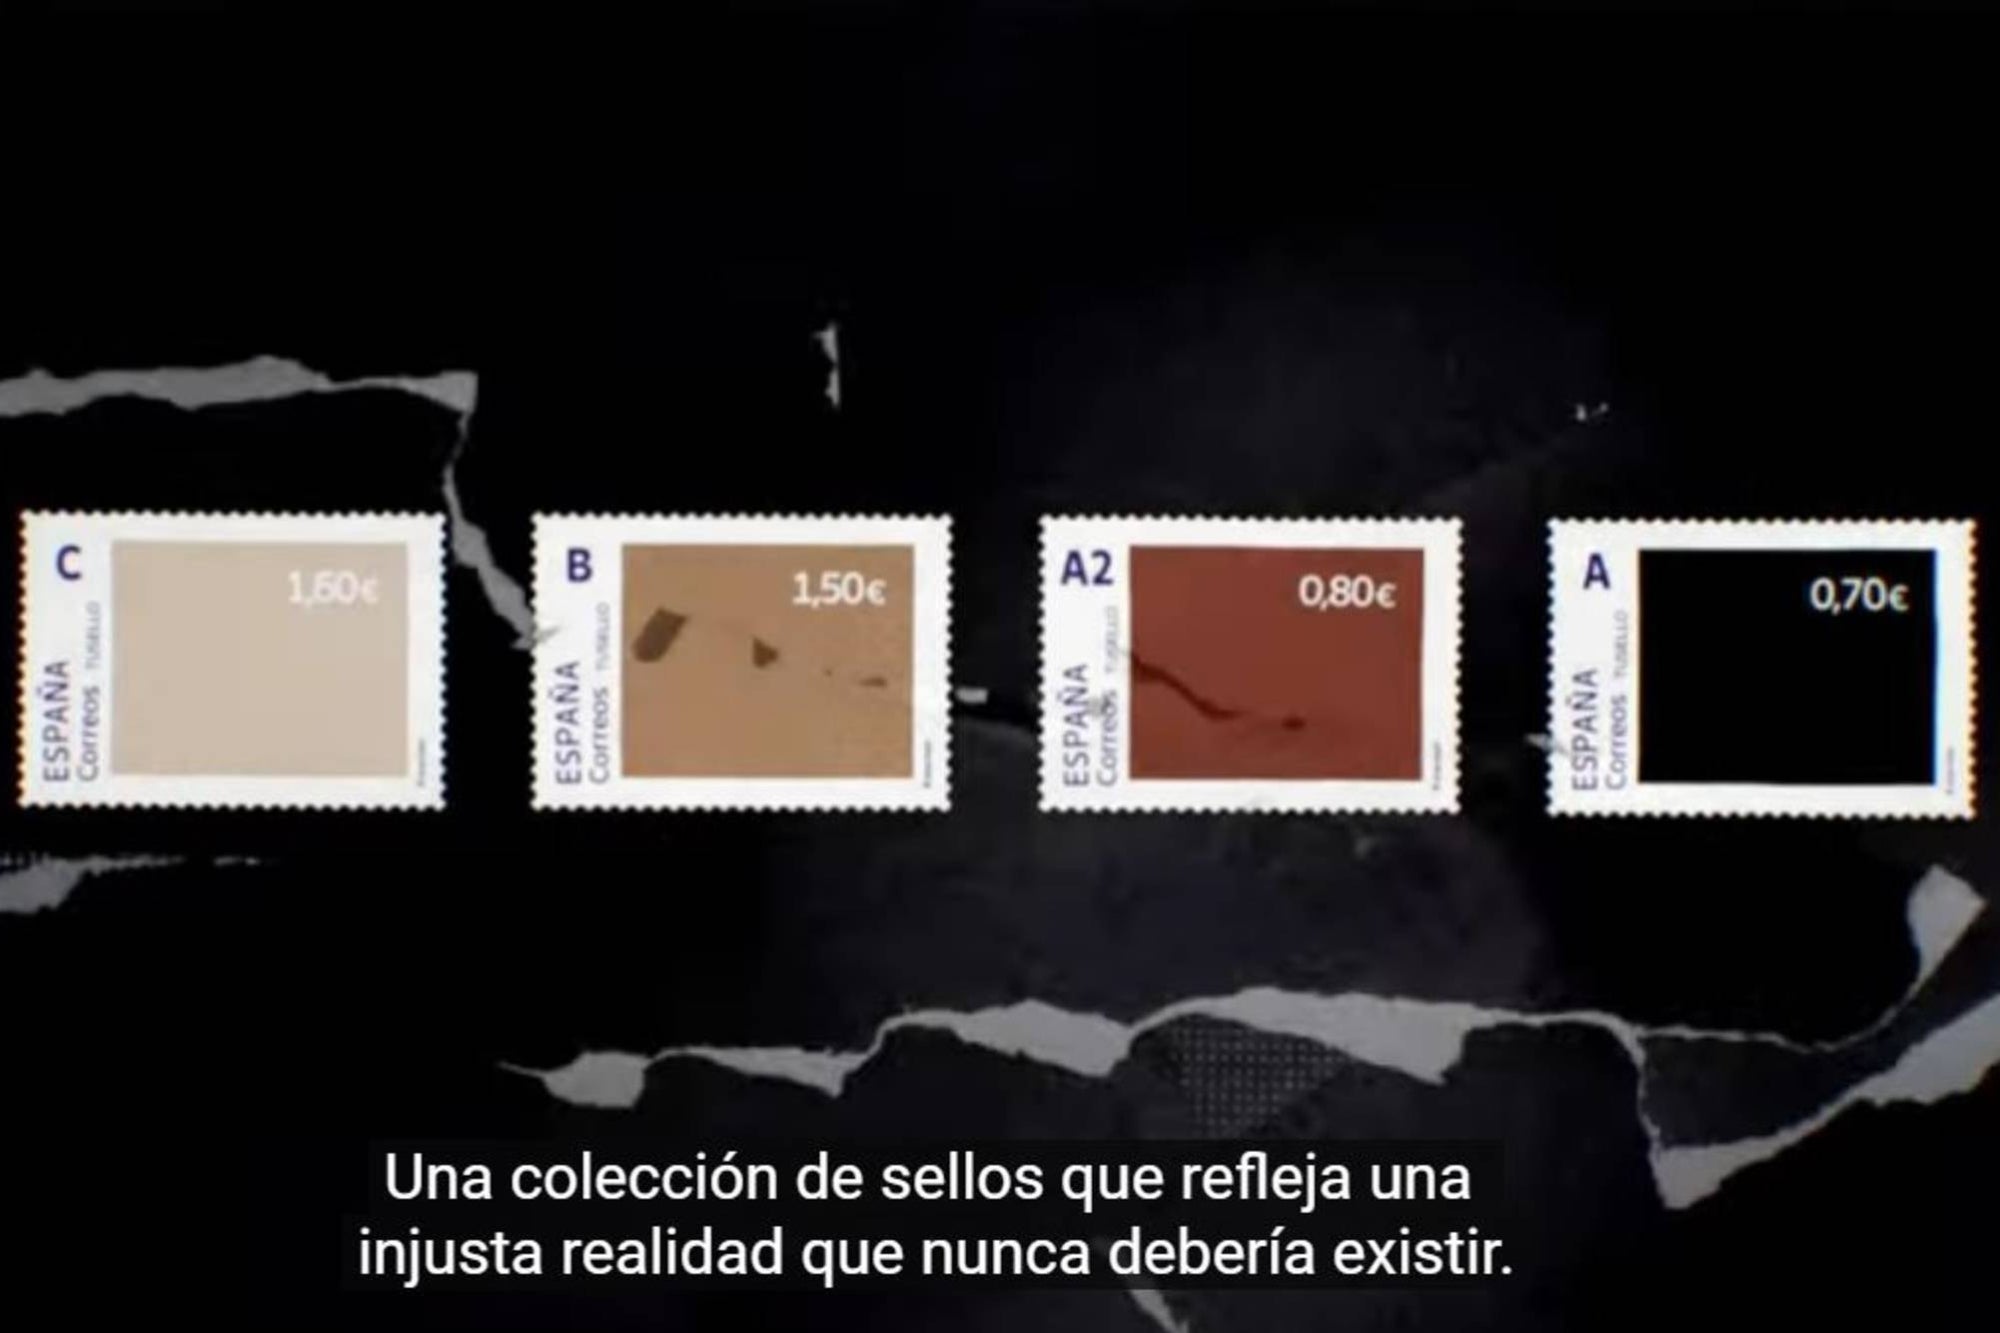 A postal company in Spain presents a 'confused' campaign against racism